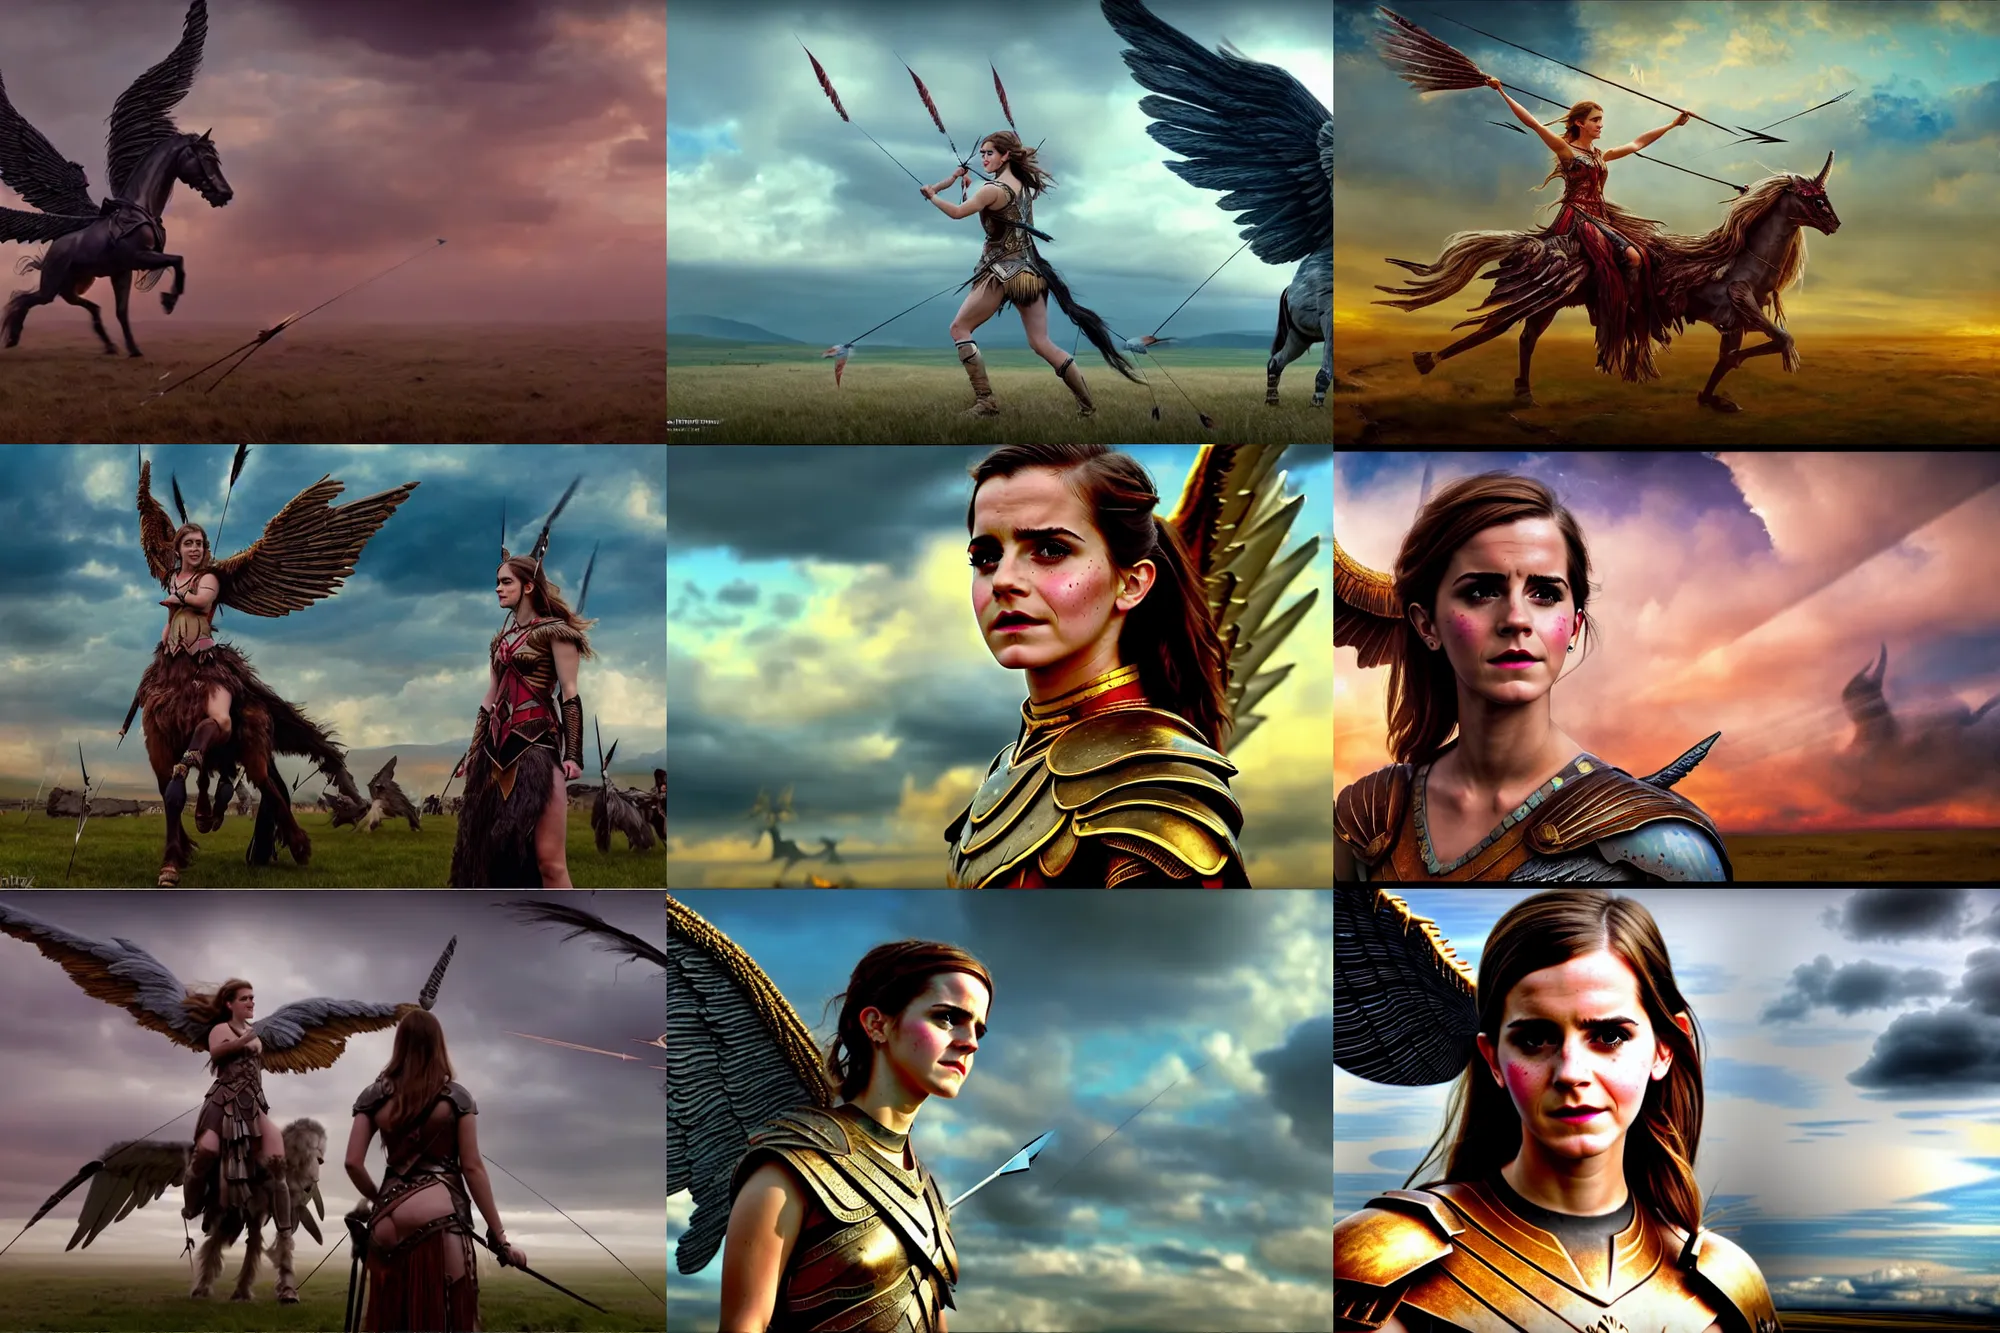 Prompt: wide - shot | dslr | emma watson | as a valkyrie warrior | giant winged horse | scarred | arrows filling the sky | by victor nizovtsev, john blanche and werner herzog | fantasy | highly detailed | north mythology | realism | film | cinematic 4 k |